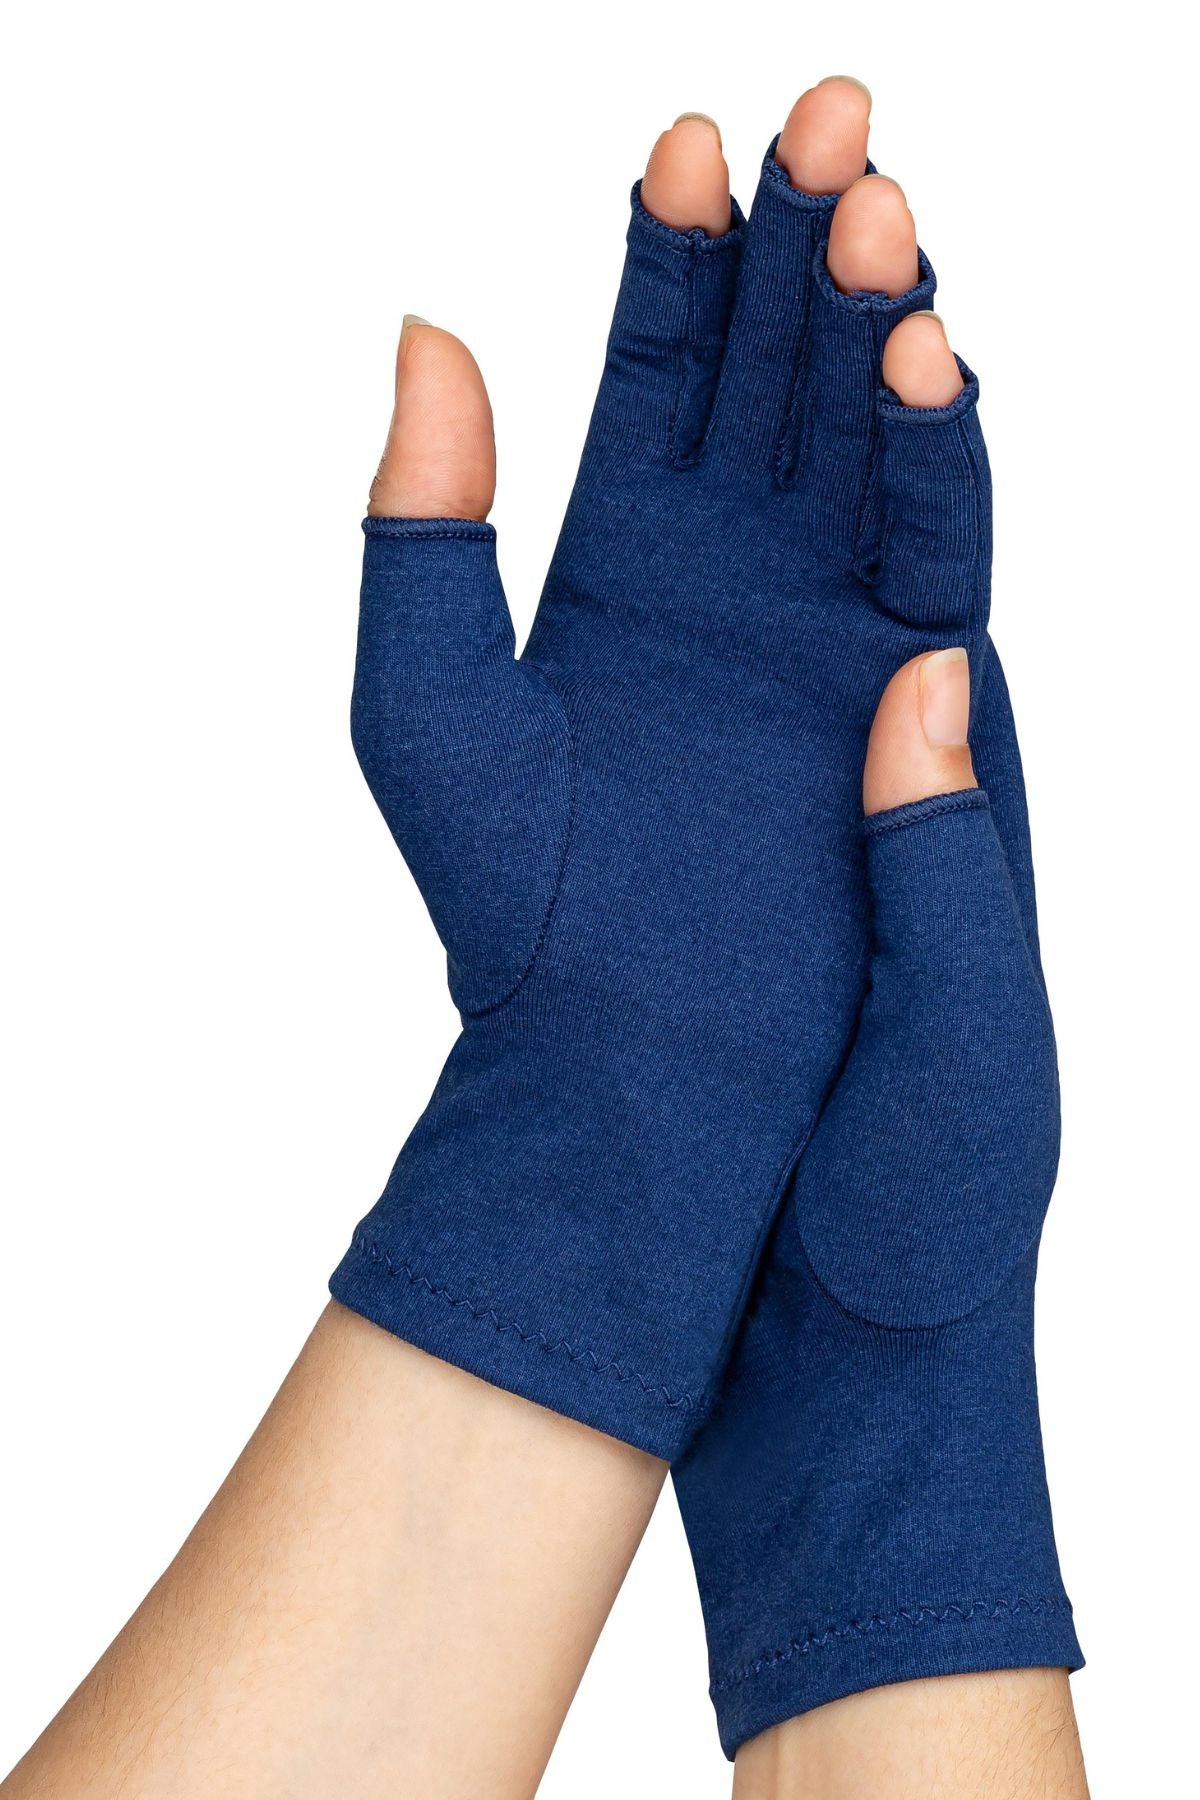 A woman with arthritis wearing Marine Blue Compression Gloves. Her hands are crossed with palms to the front.